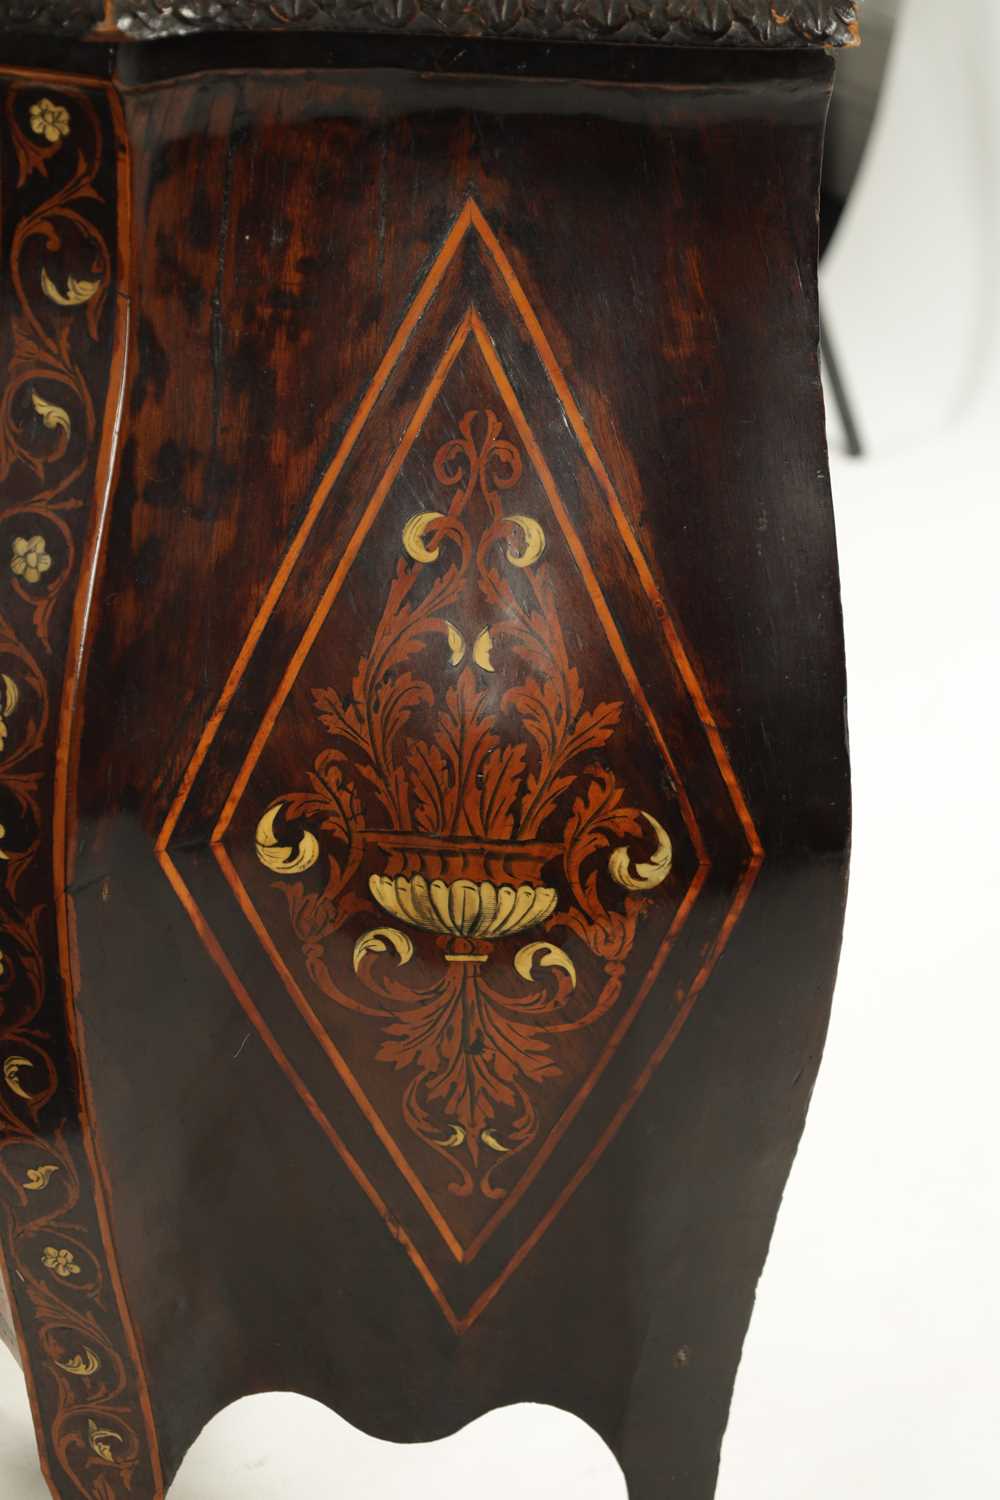 AN EARLY 18TH CENTURY ITALIAN MARQUETRY AND BONE INLAID COMMODE OF SMALL SIZE - Image 8 of 9